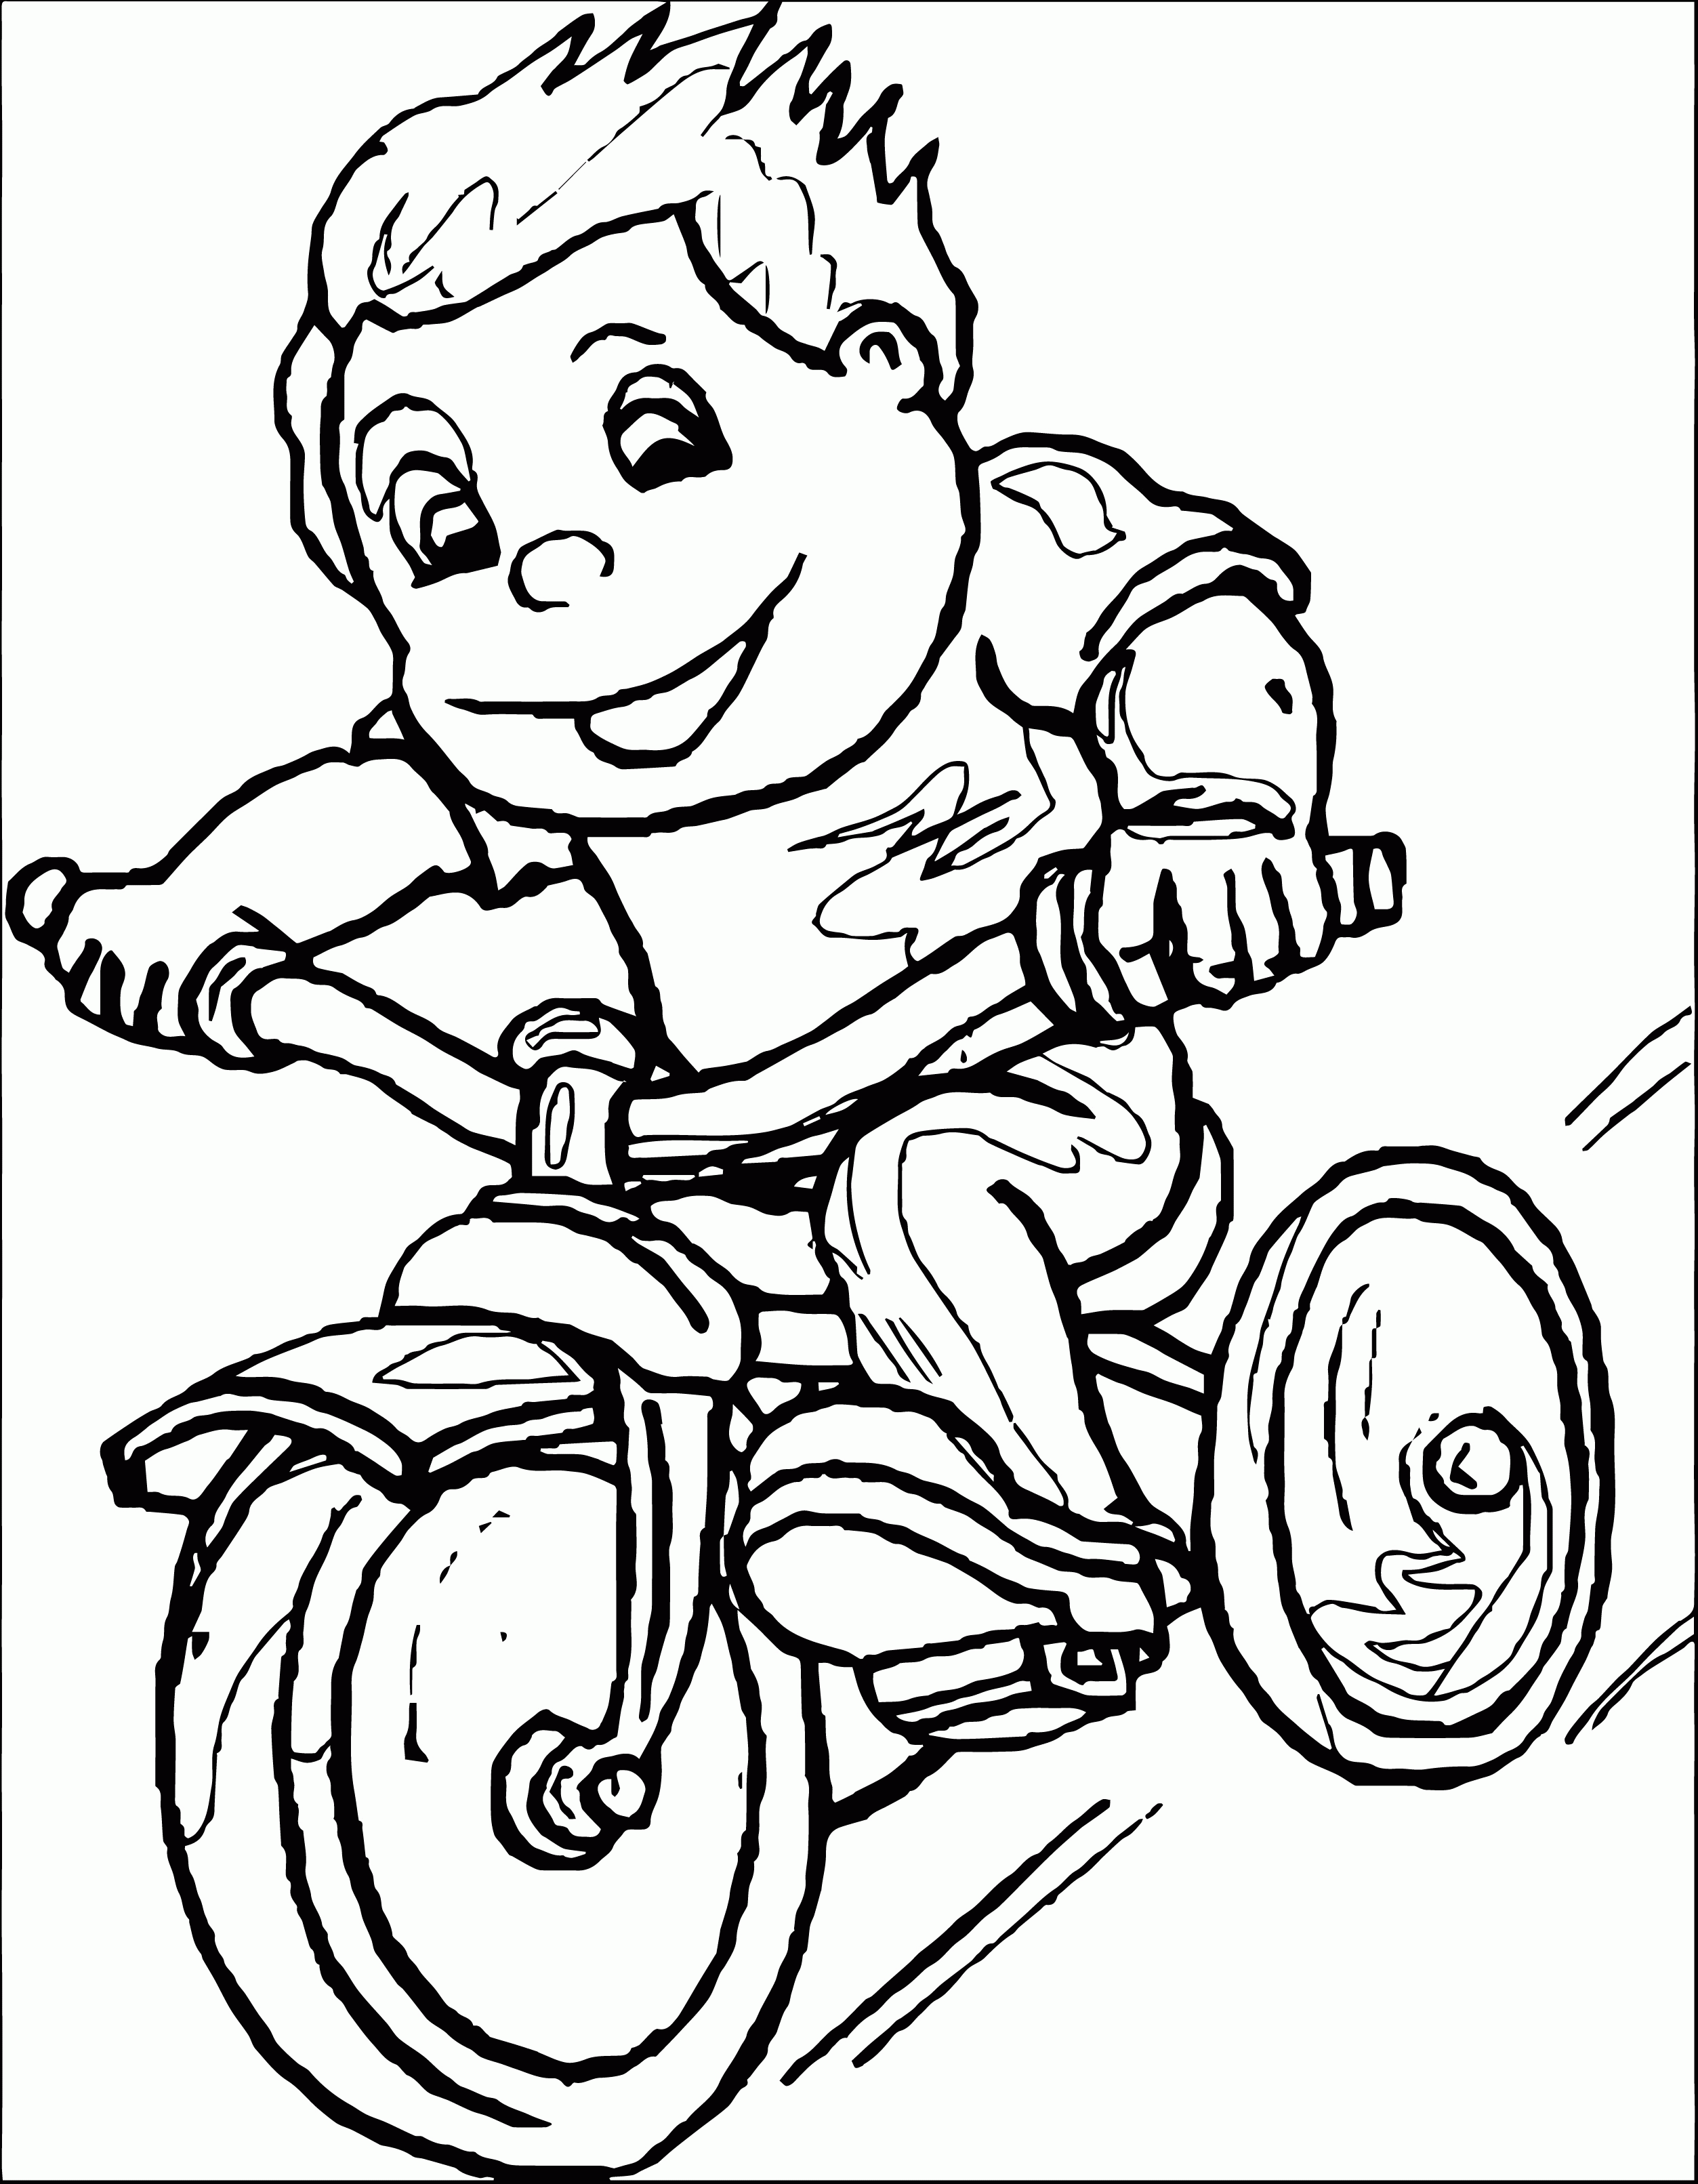 Bike Riding Coloring Page - Coloring Home